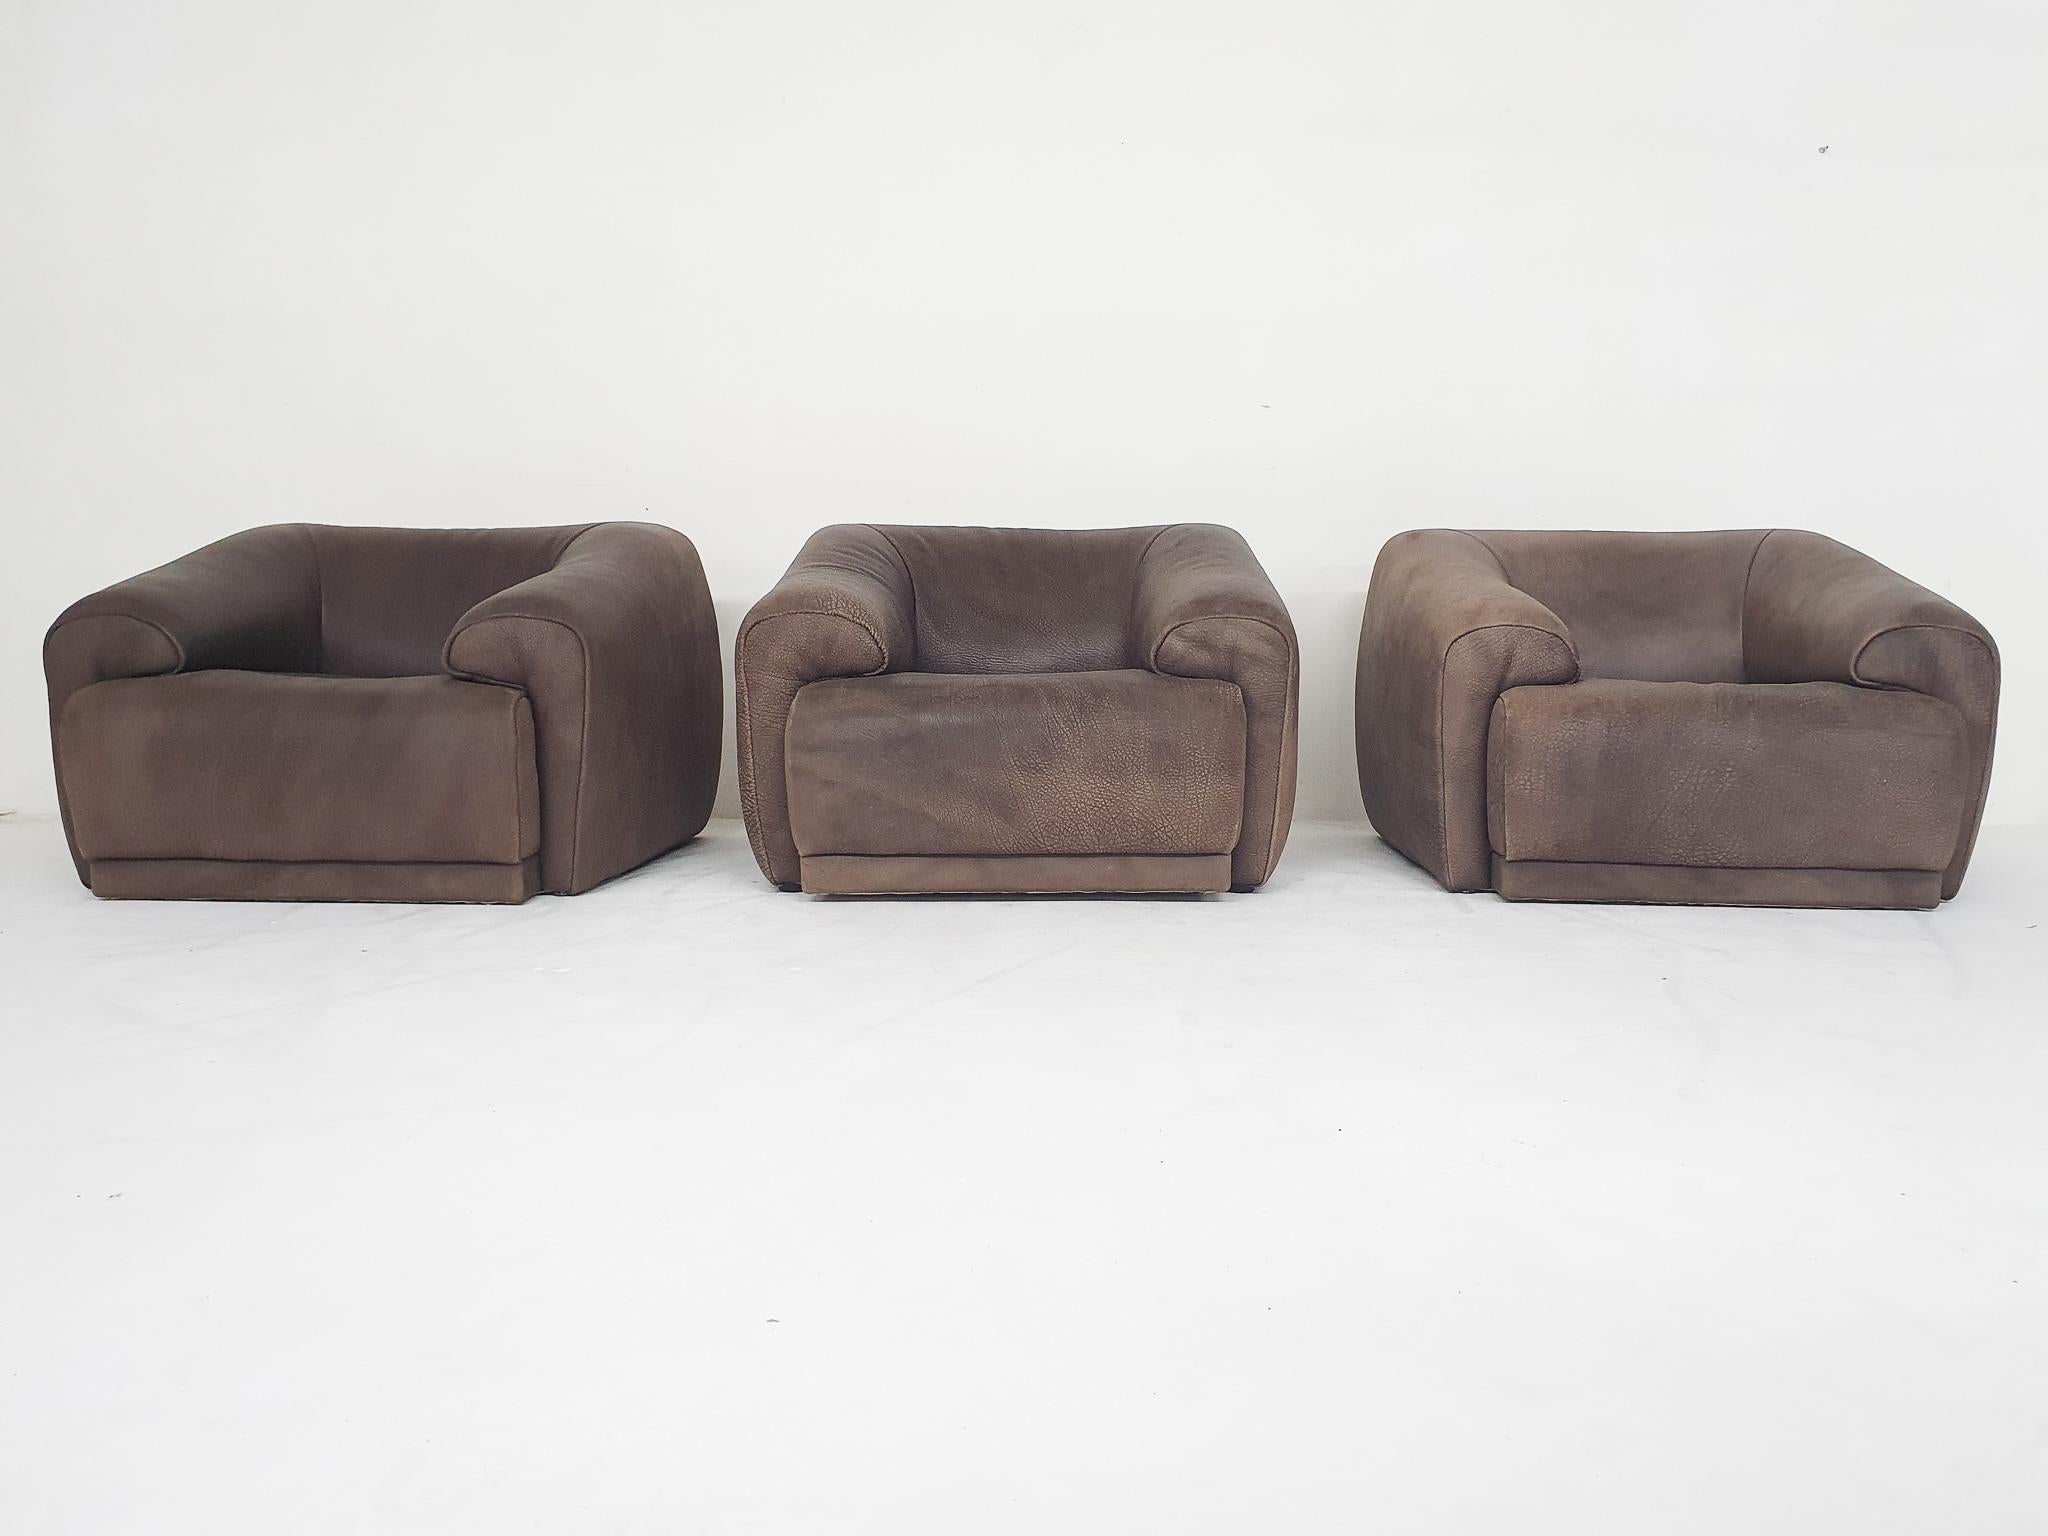 Thick brown buffalo leather lounge chairs in the Style of the model DS47 from the Swiss manufacturer De Sede.
In good condition, only one has a small damage on the seating.